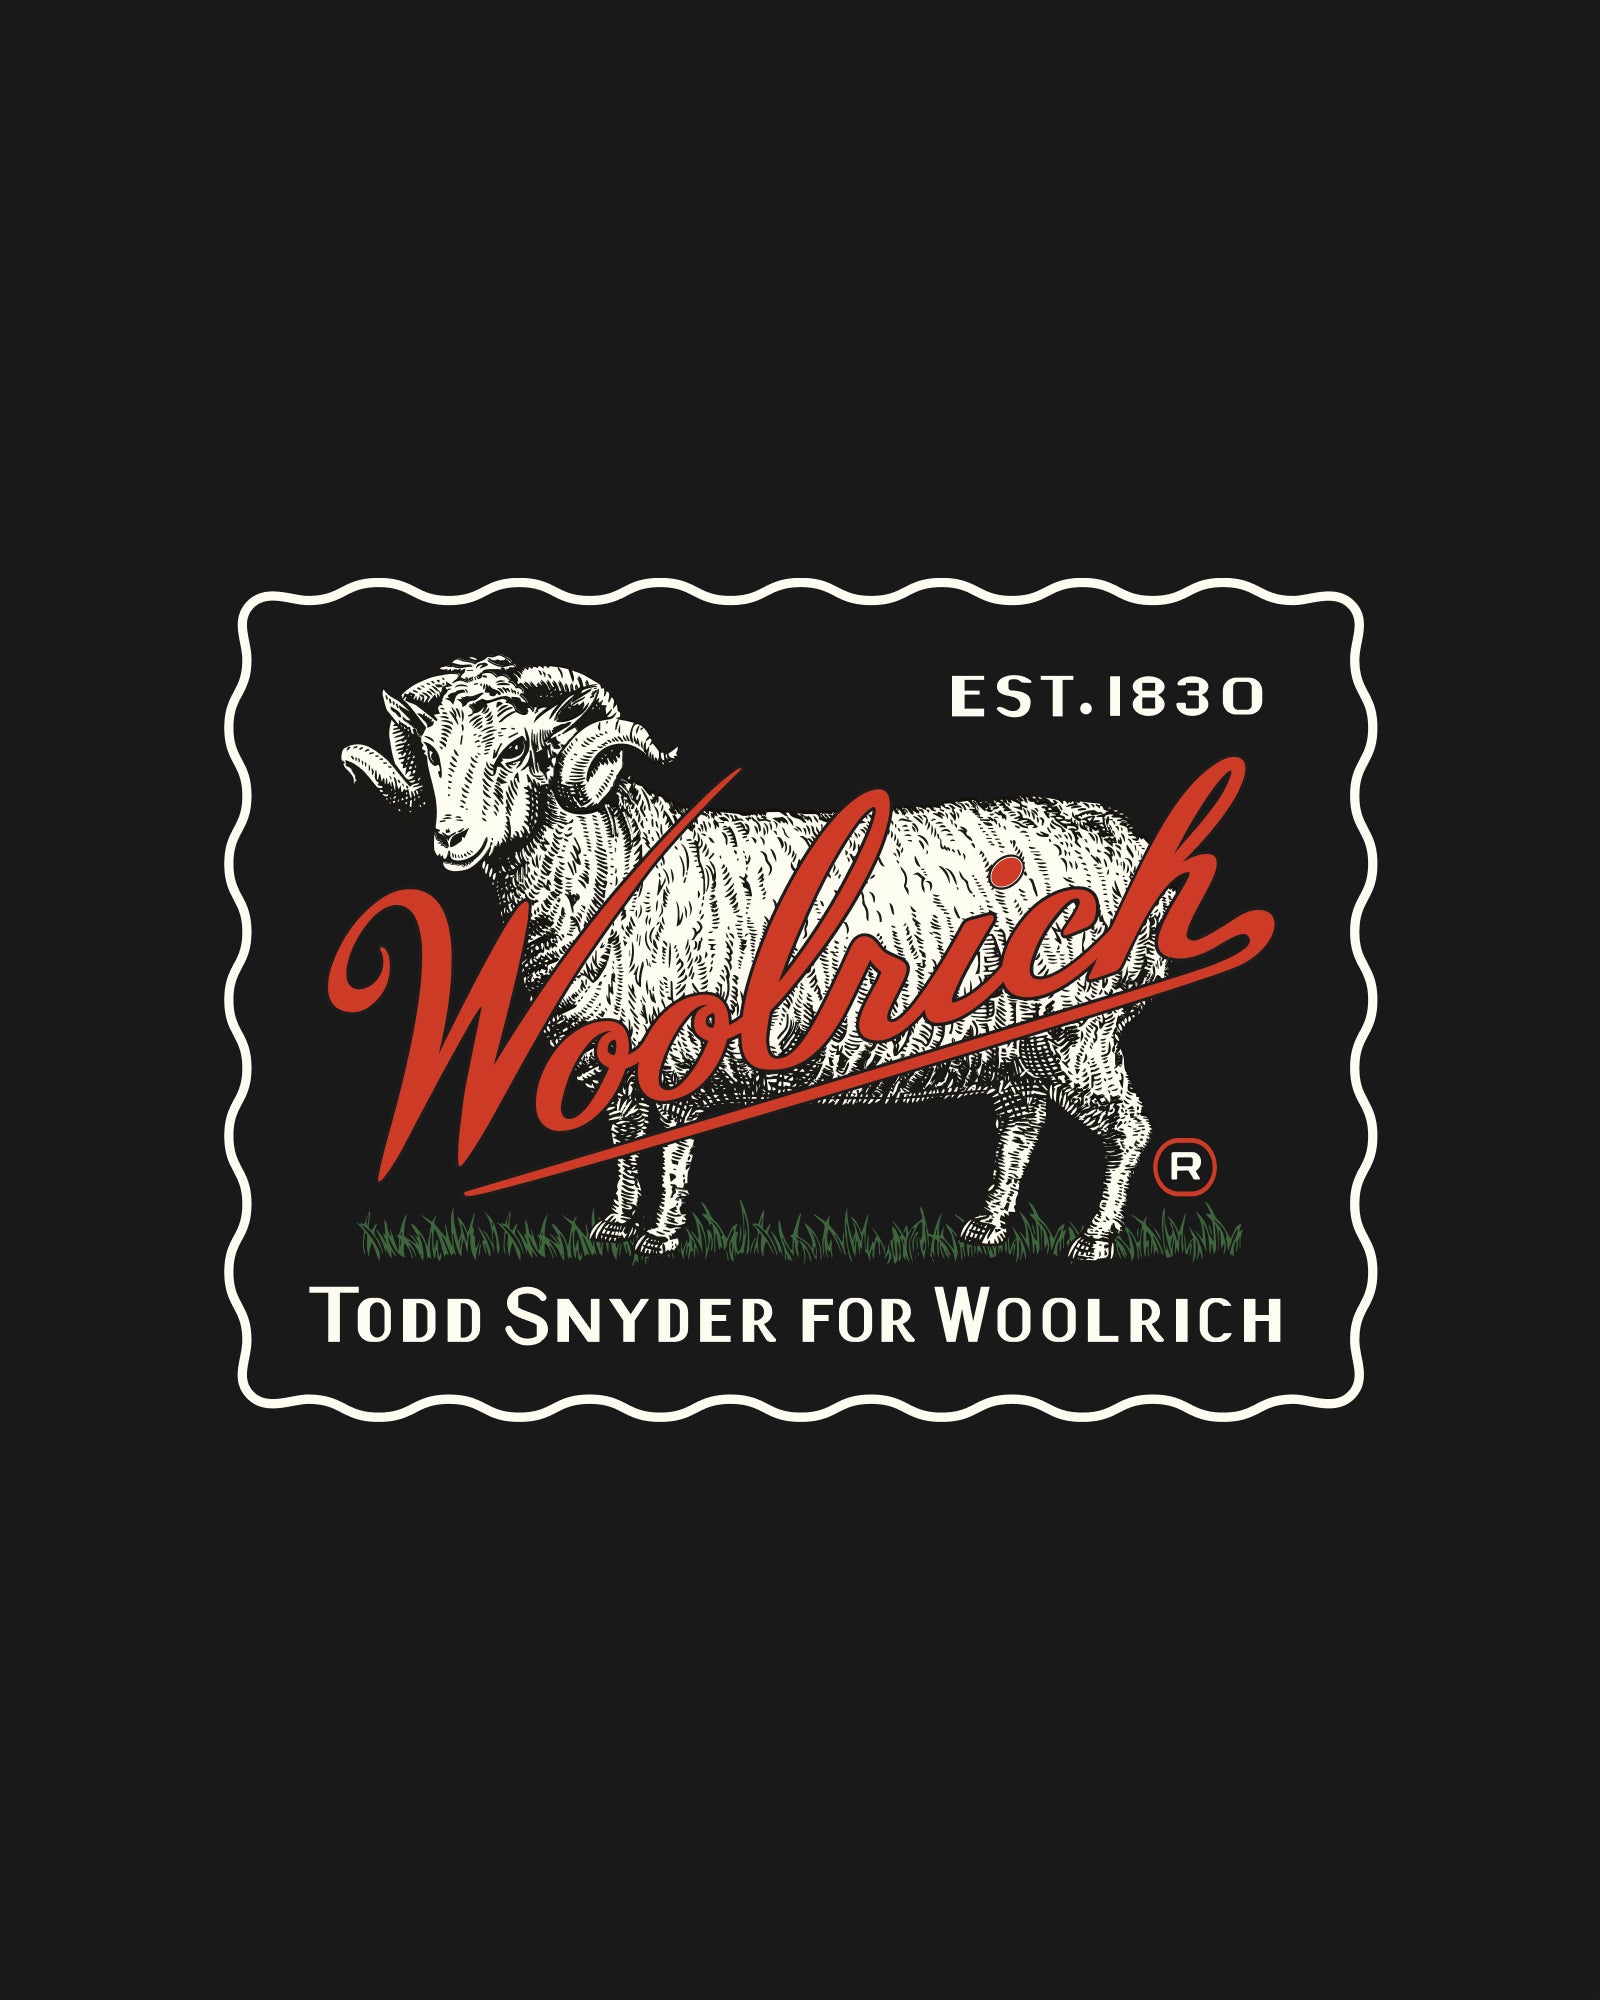 The Woolrich Black Label